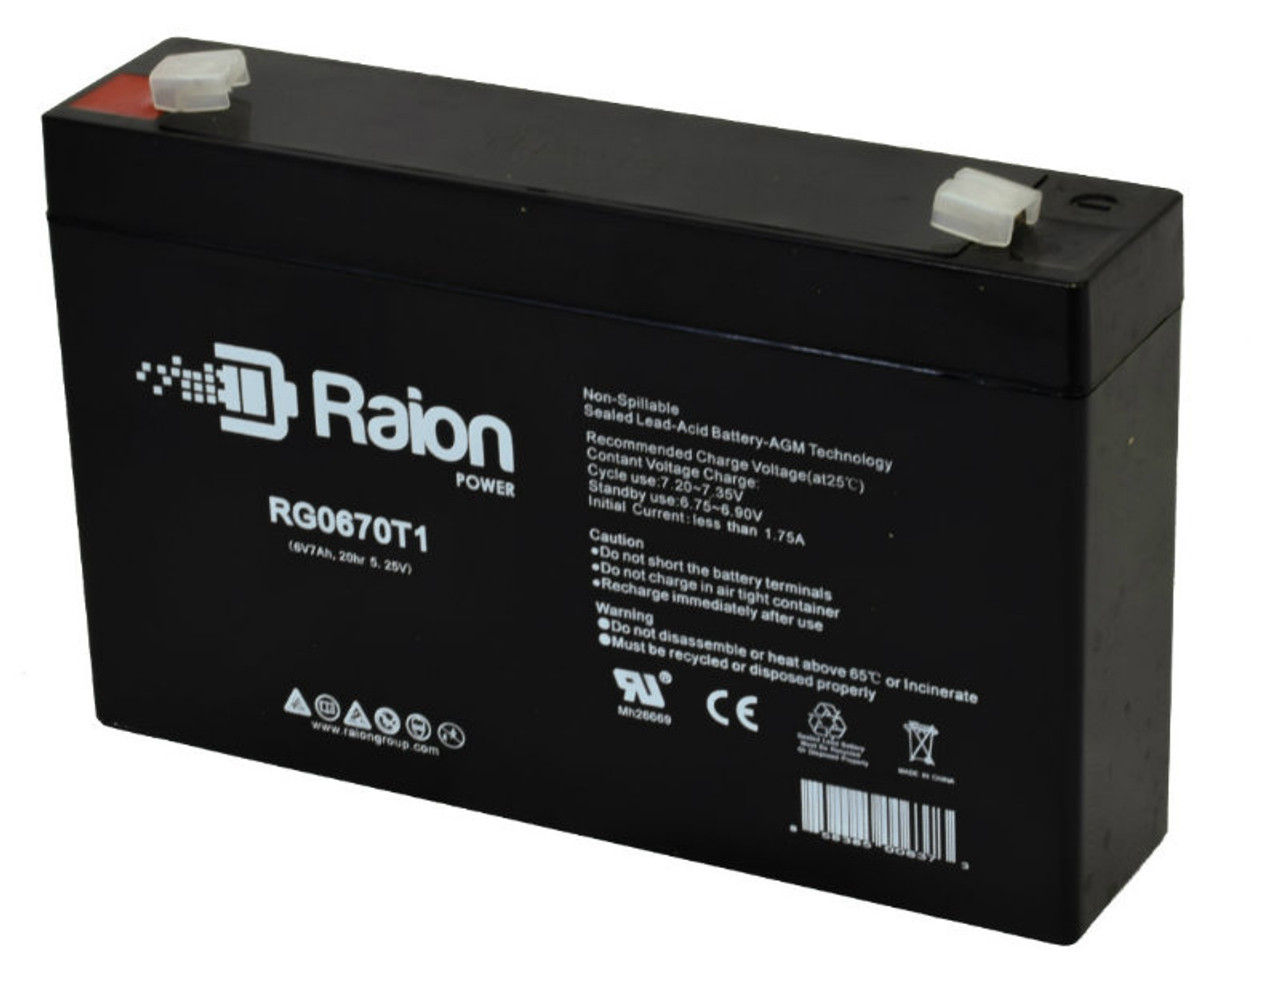 Raion Power RG0670T1 6V 7Ah Replacement Battery Cartridge for Baxter Healthcare TRAVACARE INF. Medical Equipment